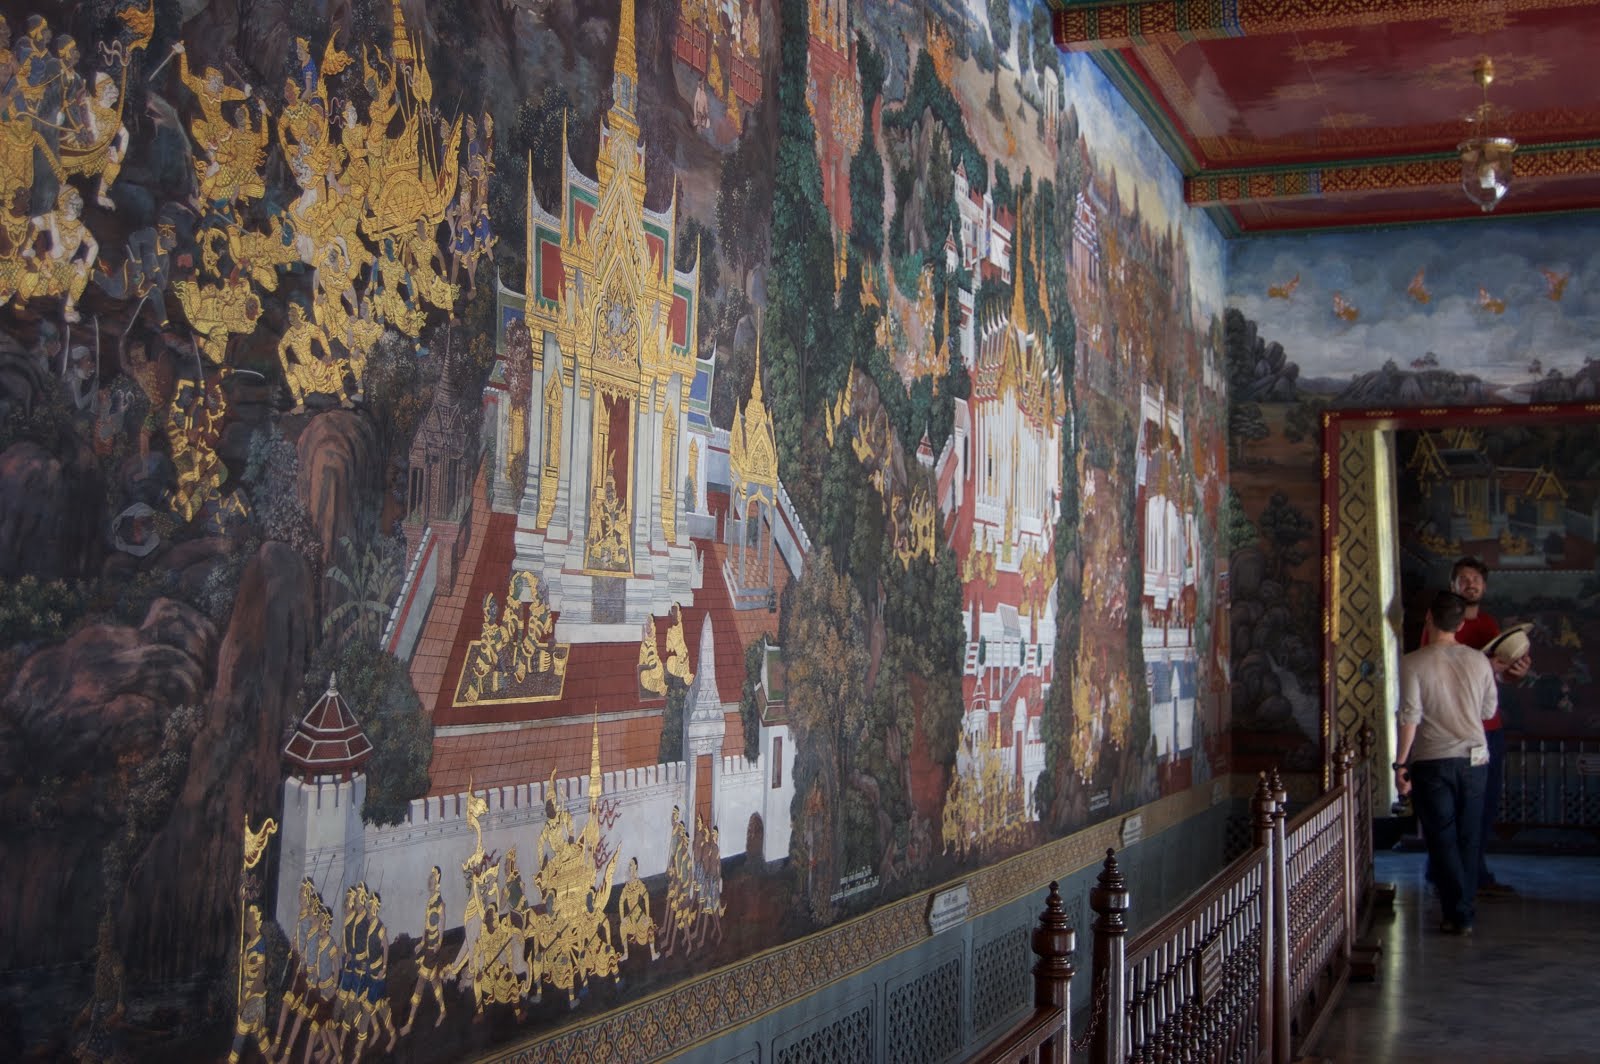 Scenes from the Grand Palace